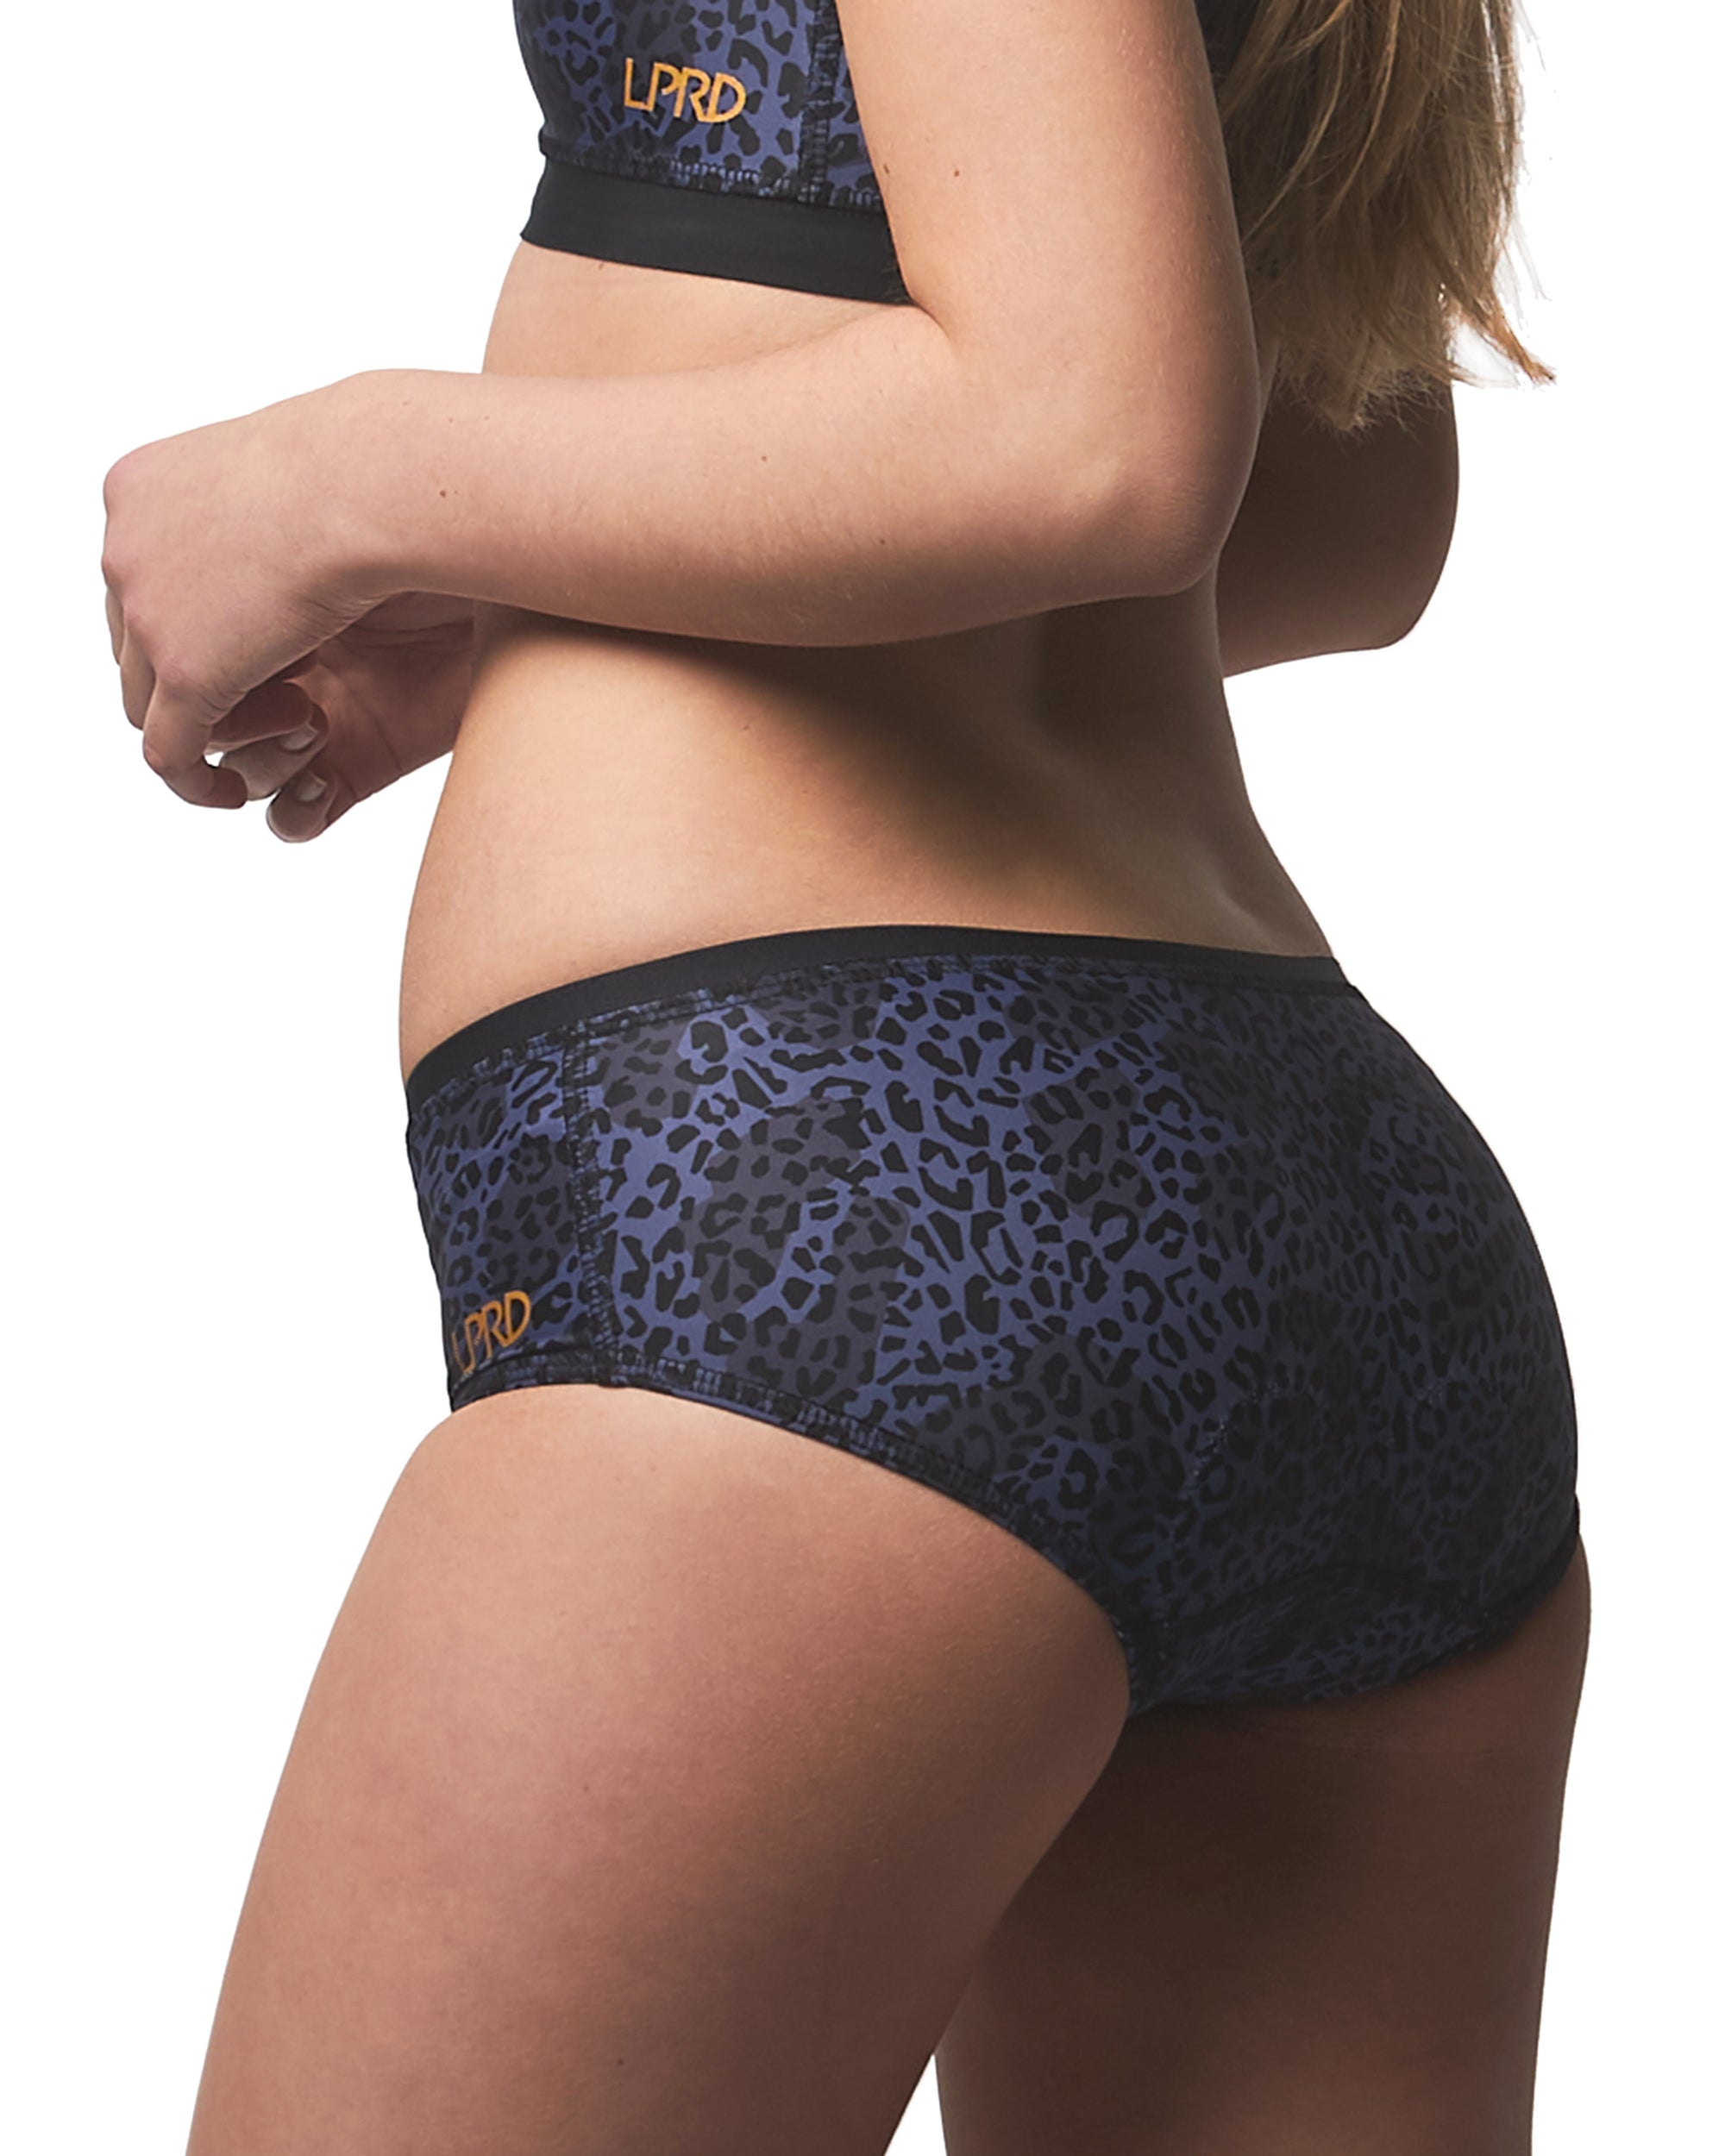 Padded cycling underwear for women - Black and blue leopard print -  Sophisticated cycling briefs to wear under your daily outfit for extra  comfort - LPRD